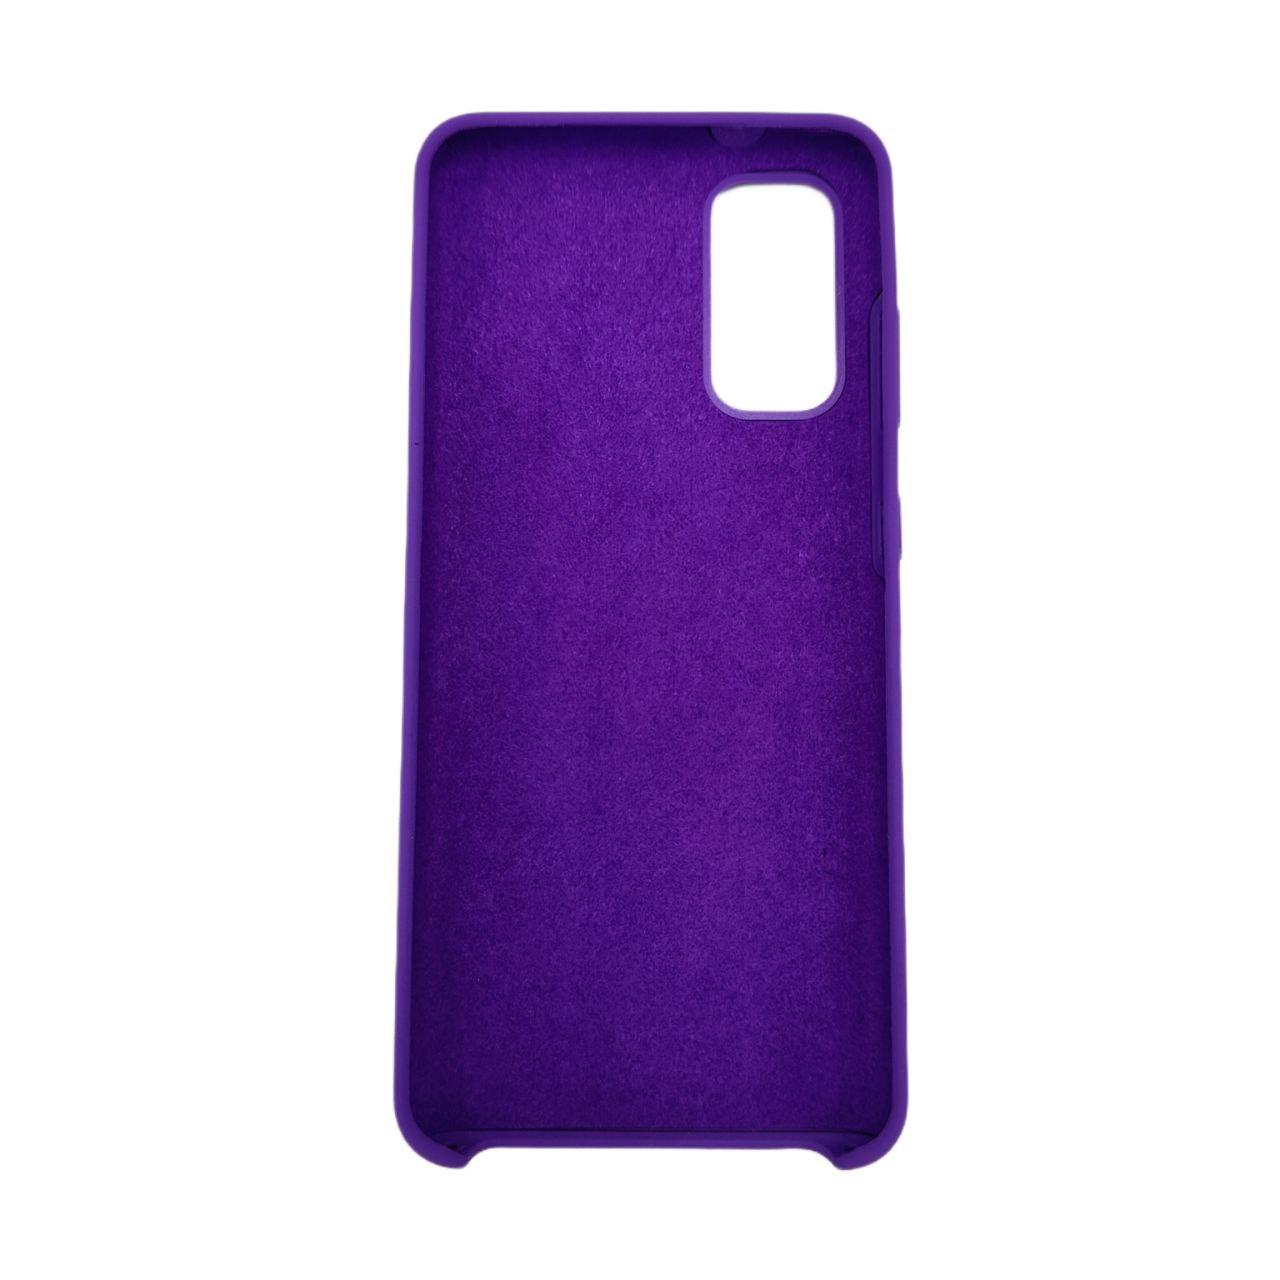 Case for Samsung S20, Silicone Gel Rubber Shock-Absorption Purple - Massive Discounts